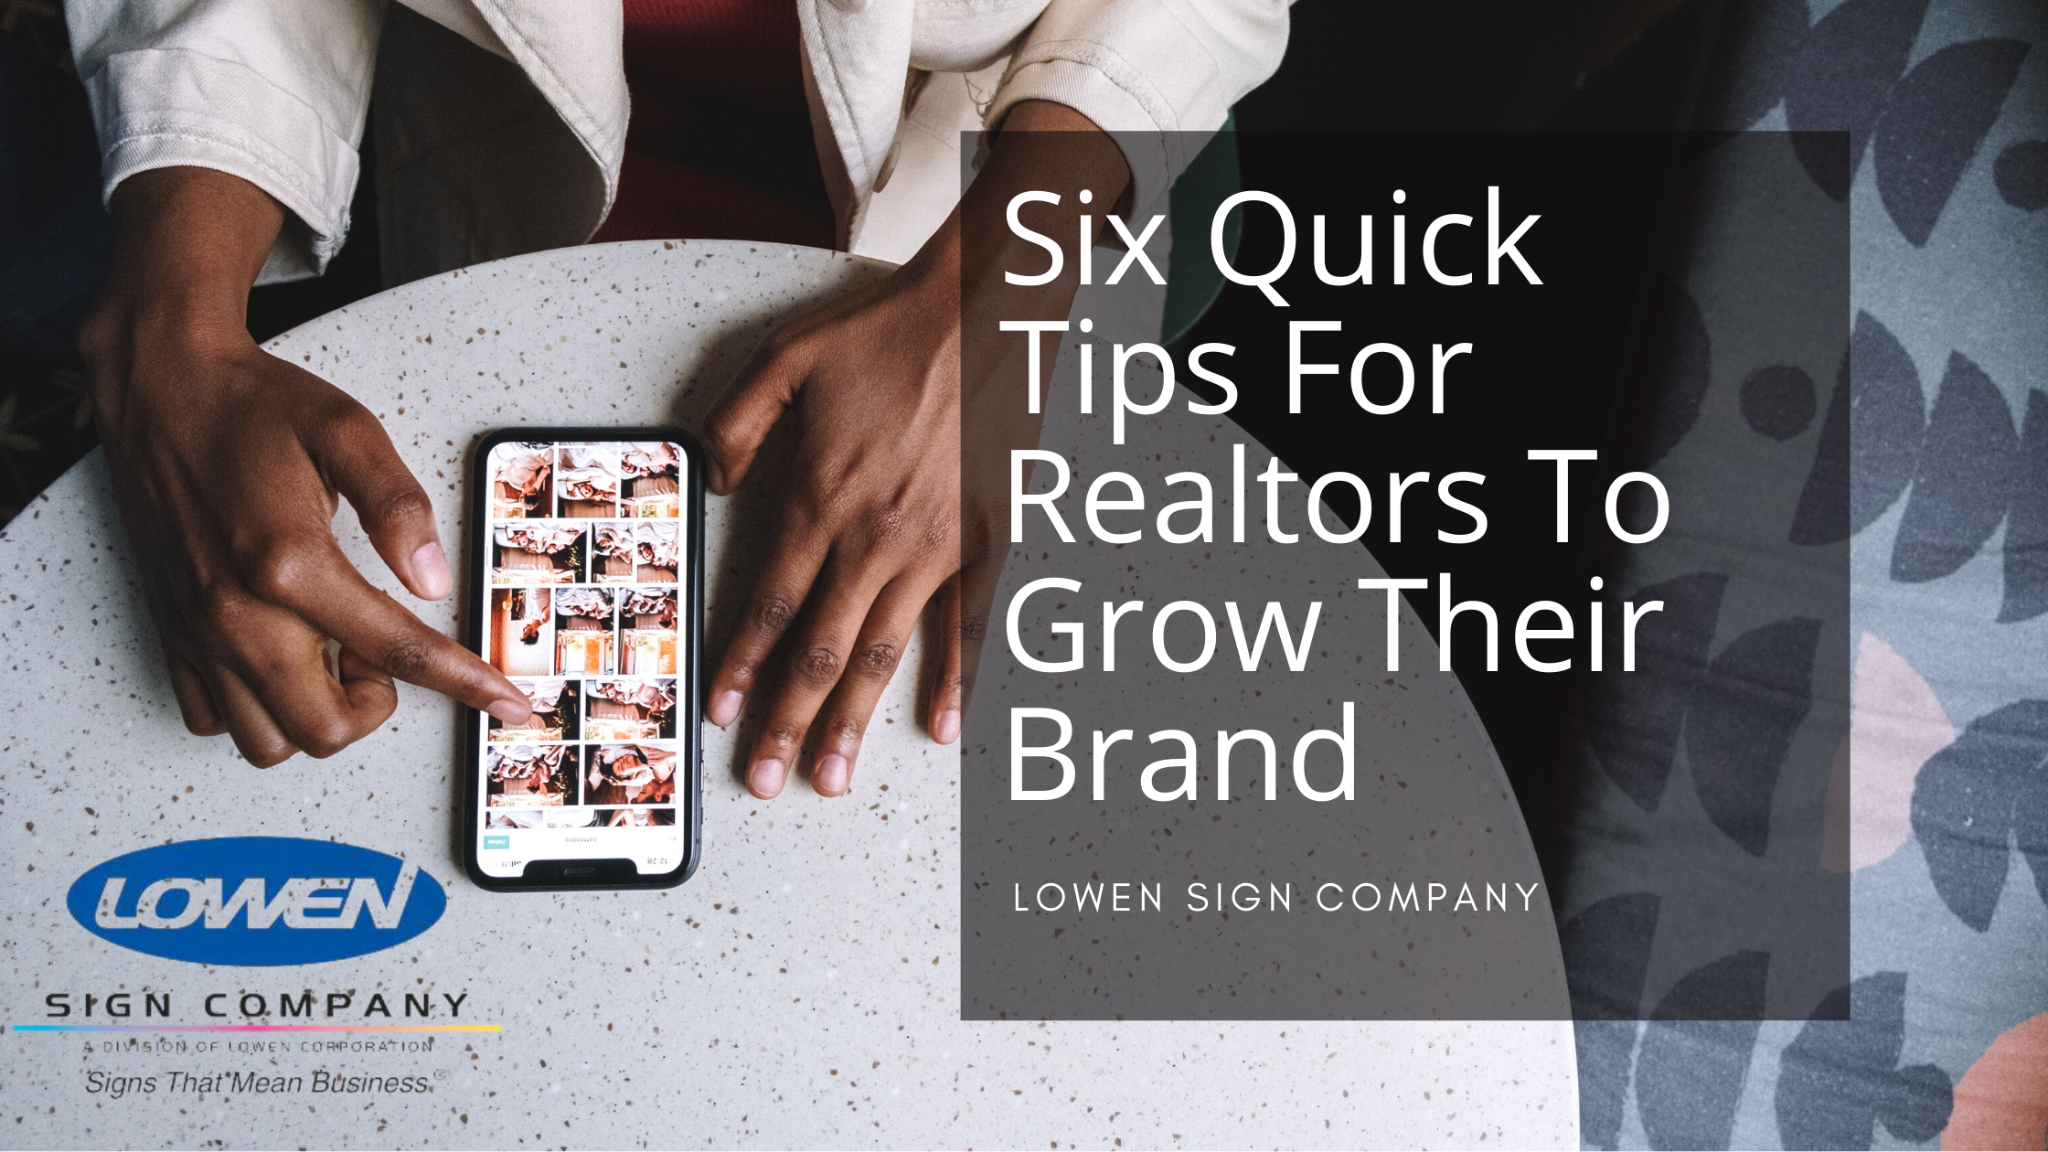 Six Quick Tips For Realtors To Grow Their Brand image.